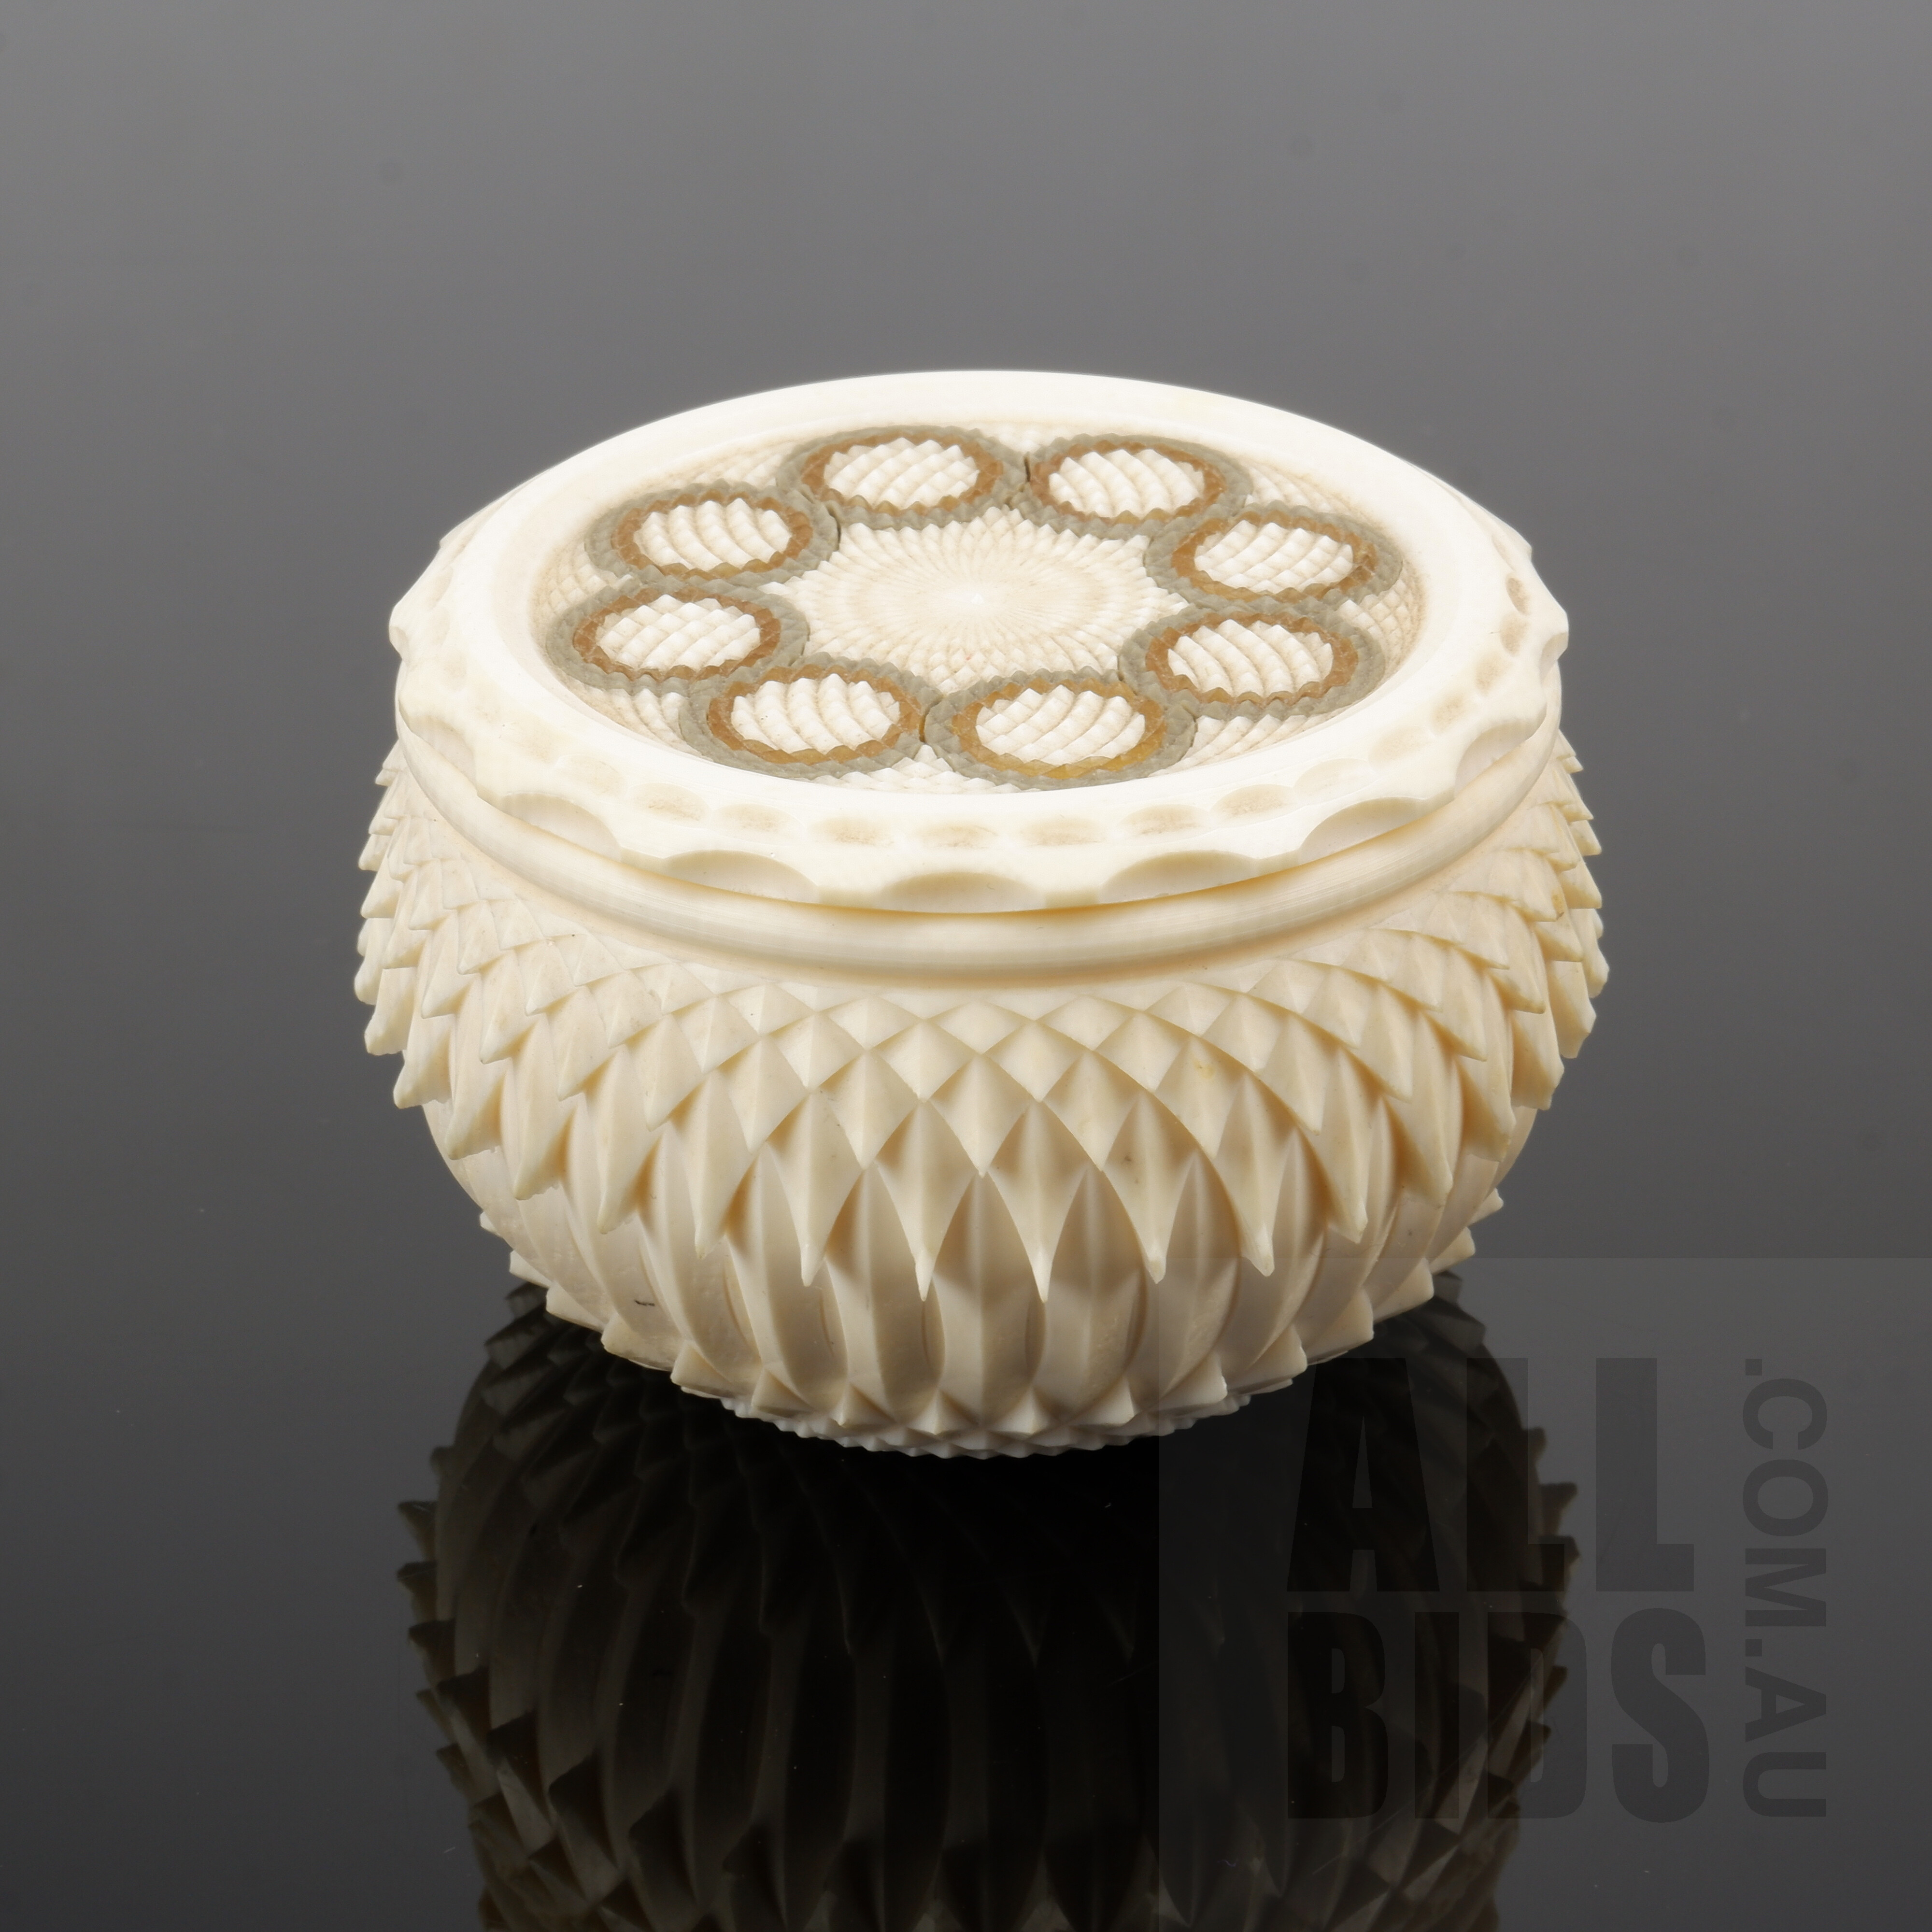 'Small Turned Ivory Trinket Box with Inlaid Circles'